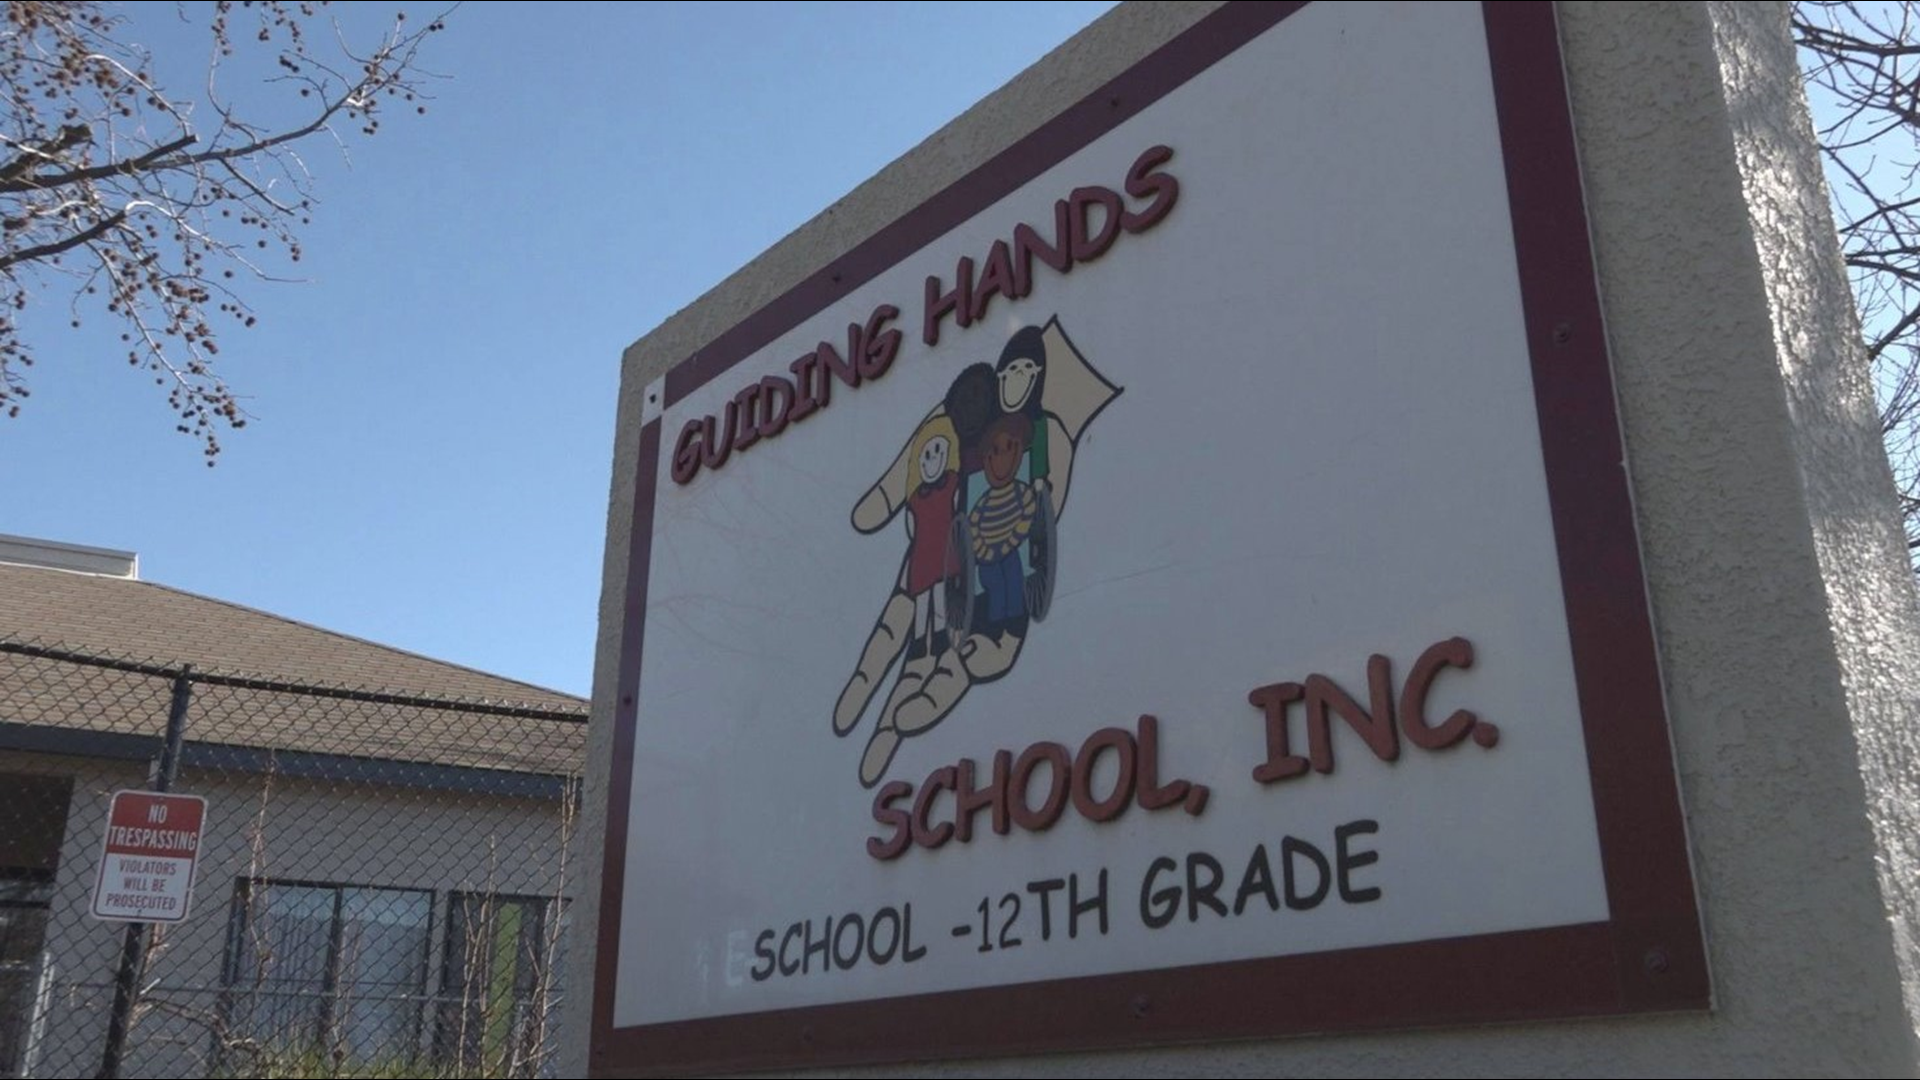 The Guiding Hands School in El Dorado Hills closed its doors on Friday, after serving 25 years as a school for special needs students in the Sacramento region. The school has been surrounded in turmoil over the last three months, after a child with autism died after a staff member restrained him in late November 2018.